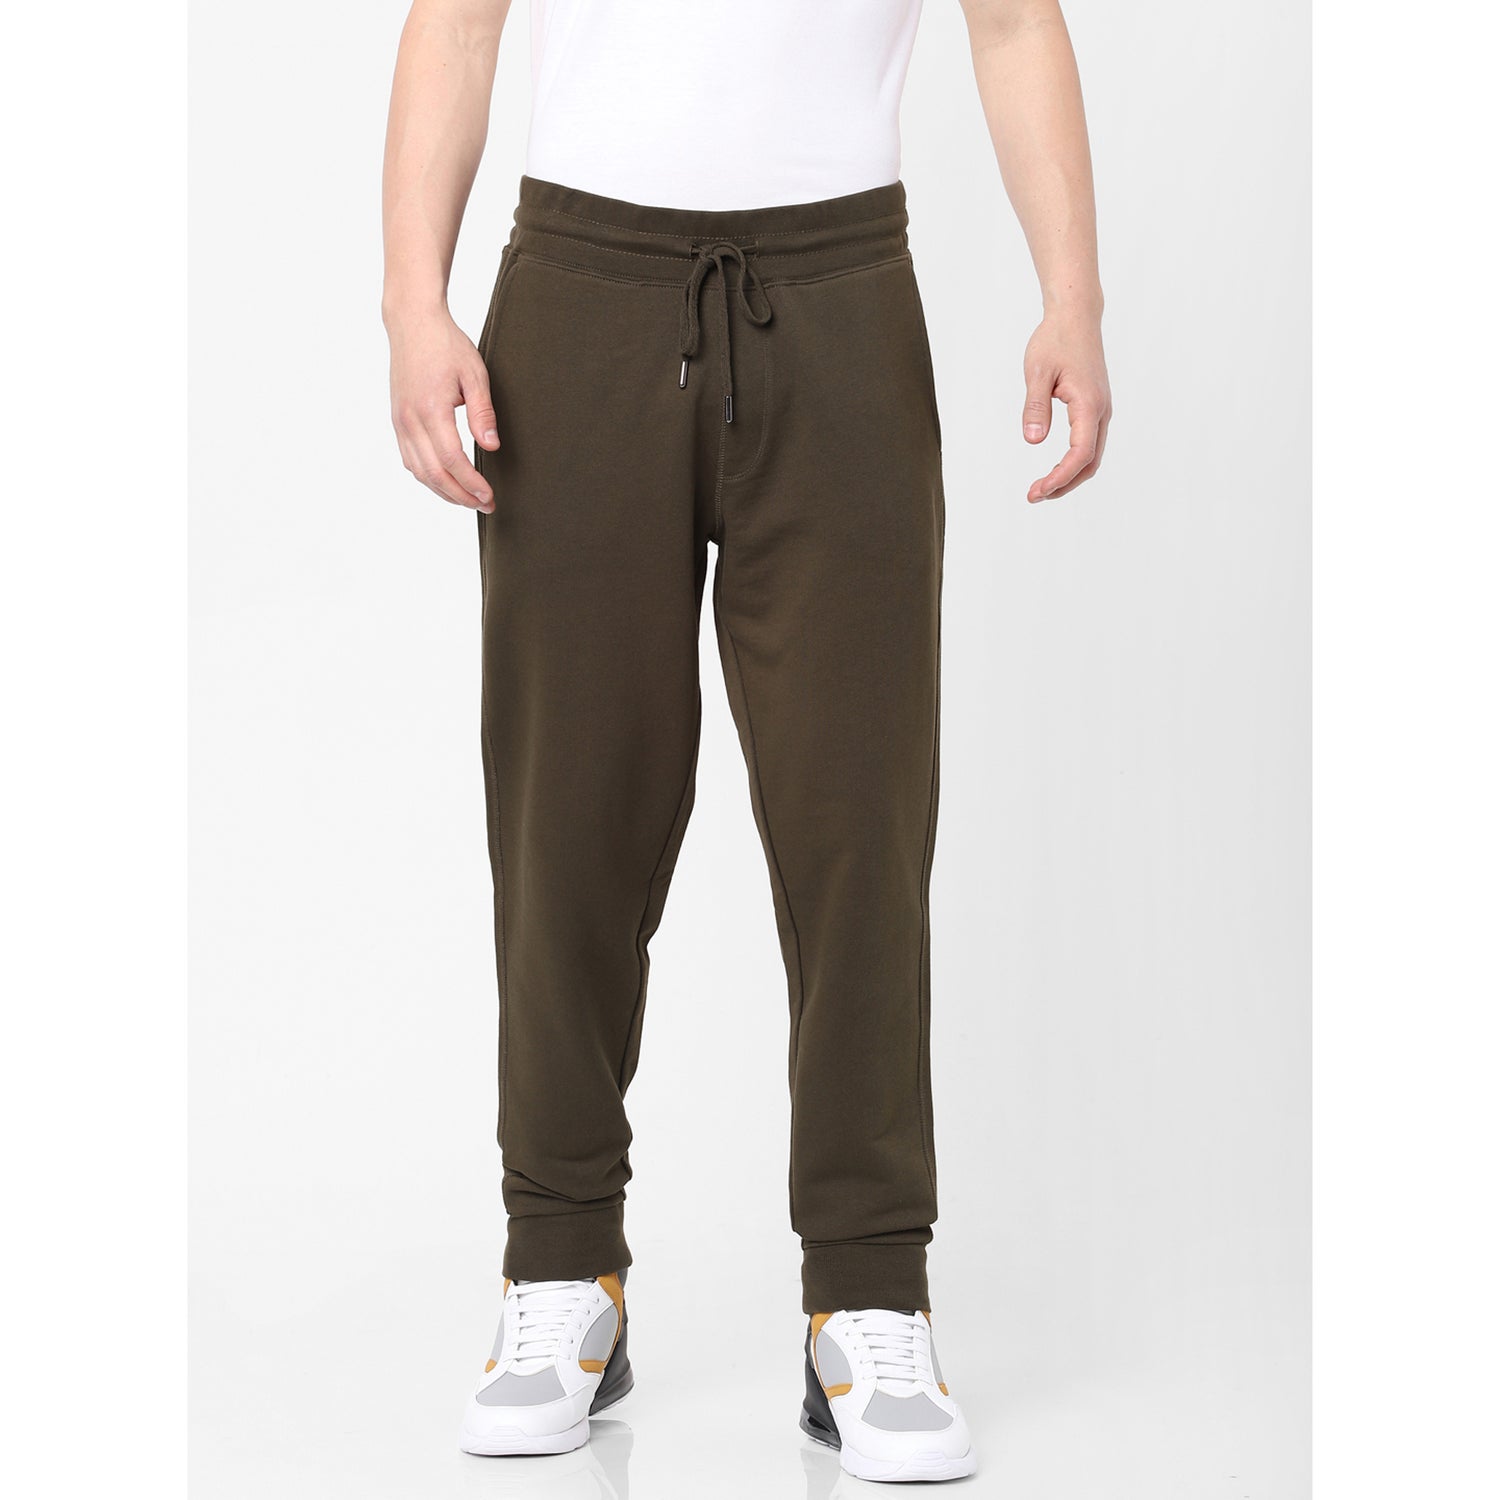 Olive Green Solid Cotton Joggers (TOJOGGIEIN)